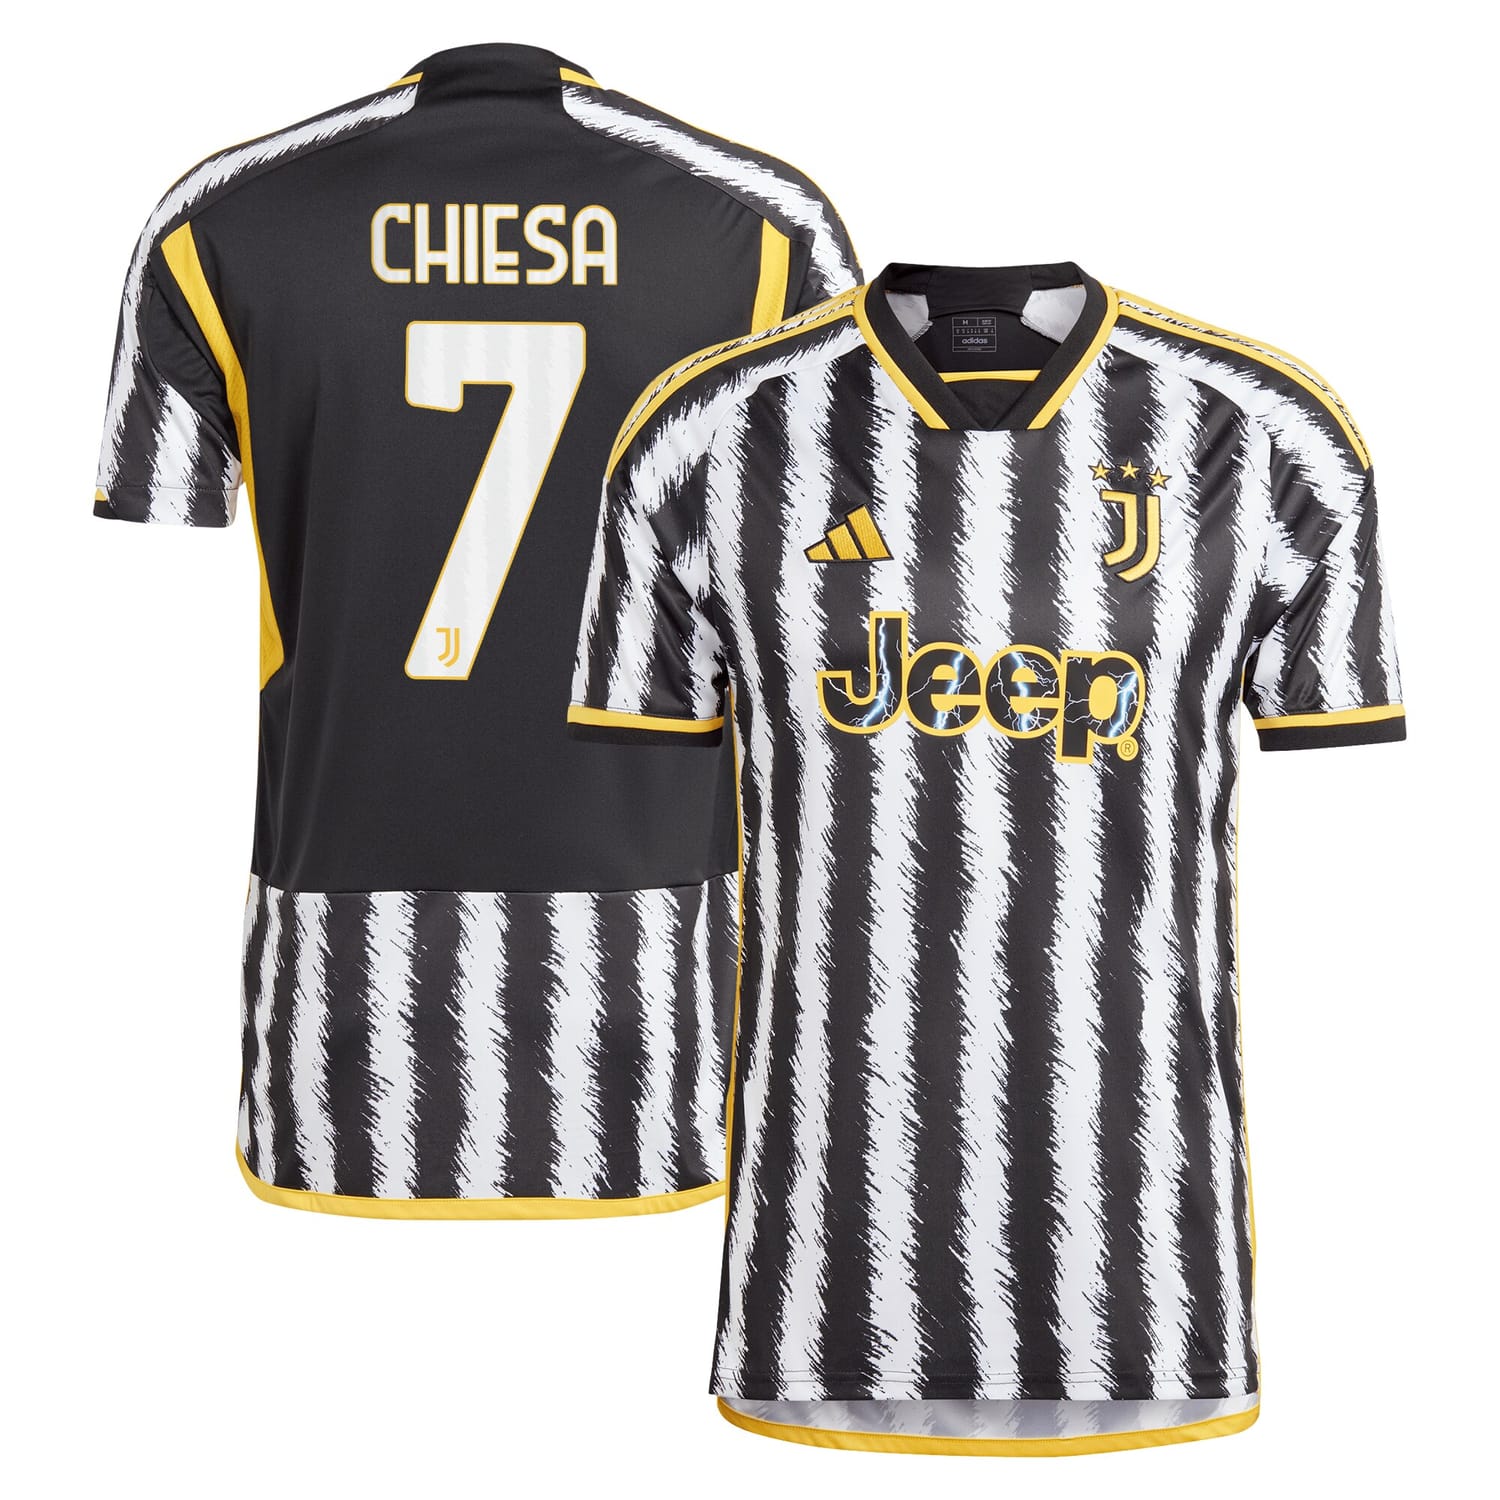 Serie A Juventus Home Jersey Shirt Black 2023-24 player Federico Chiesa printing for Men